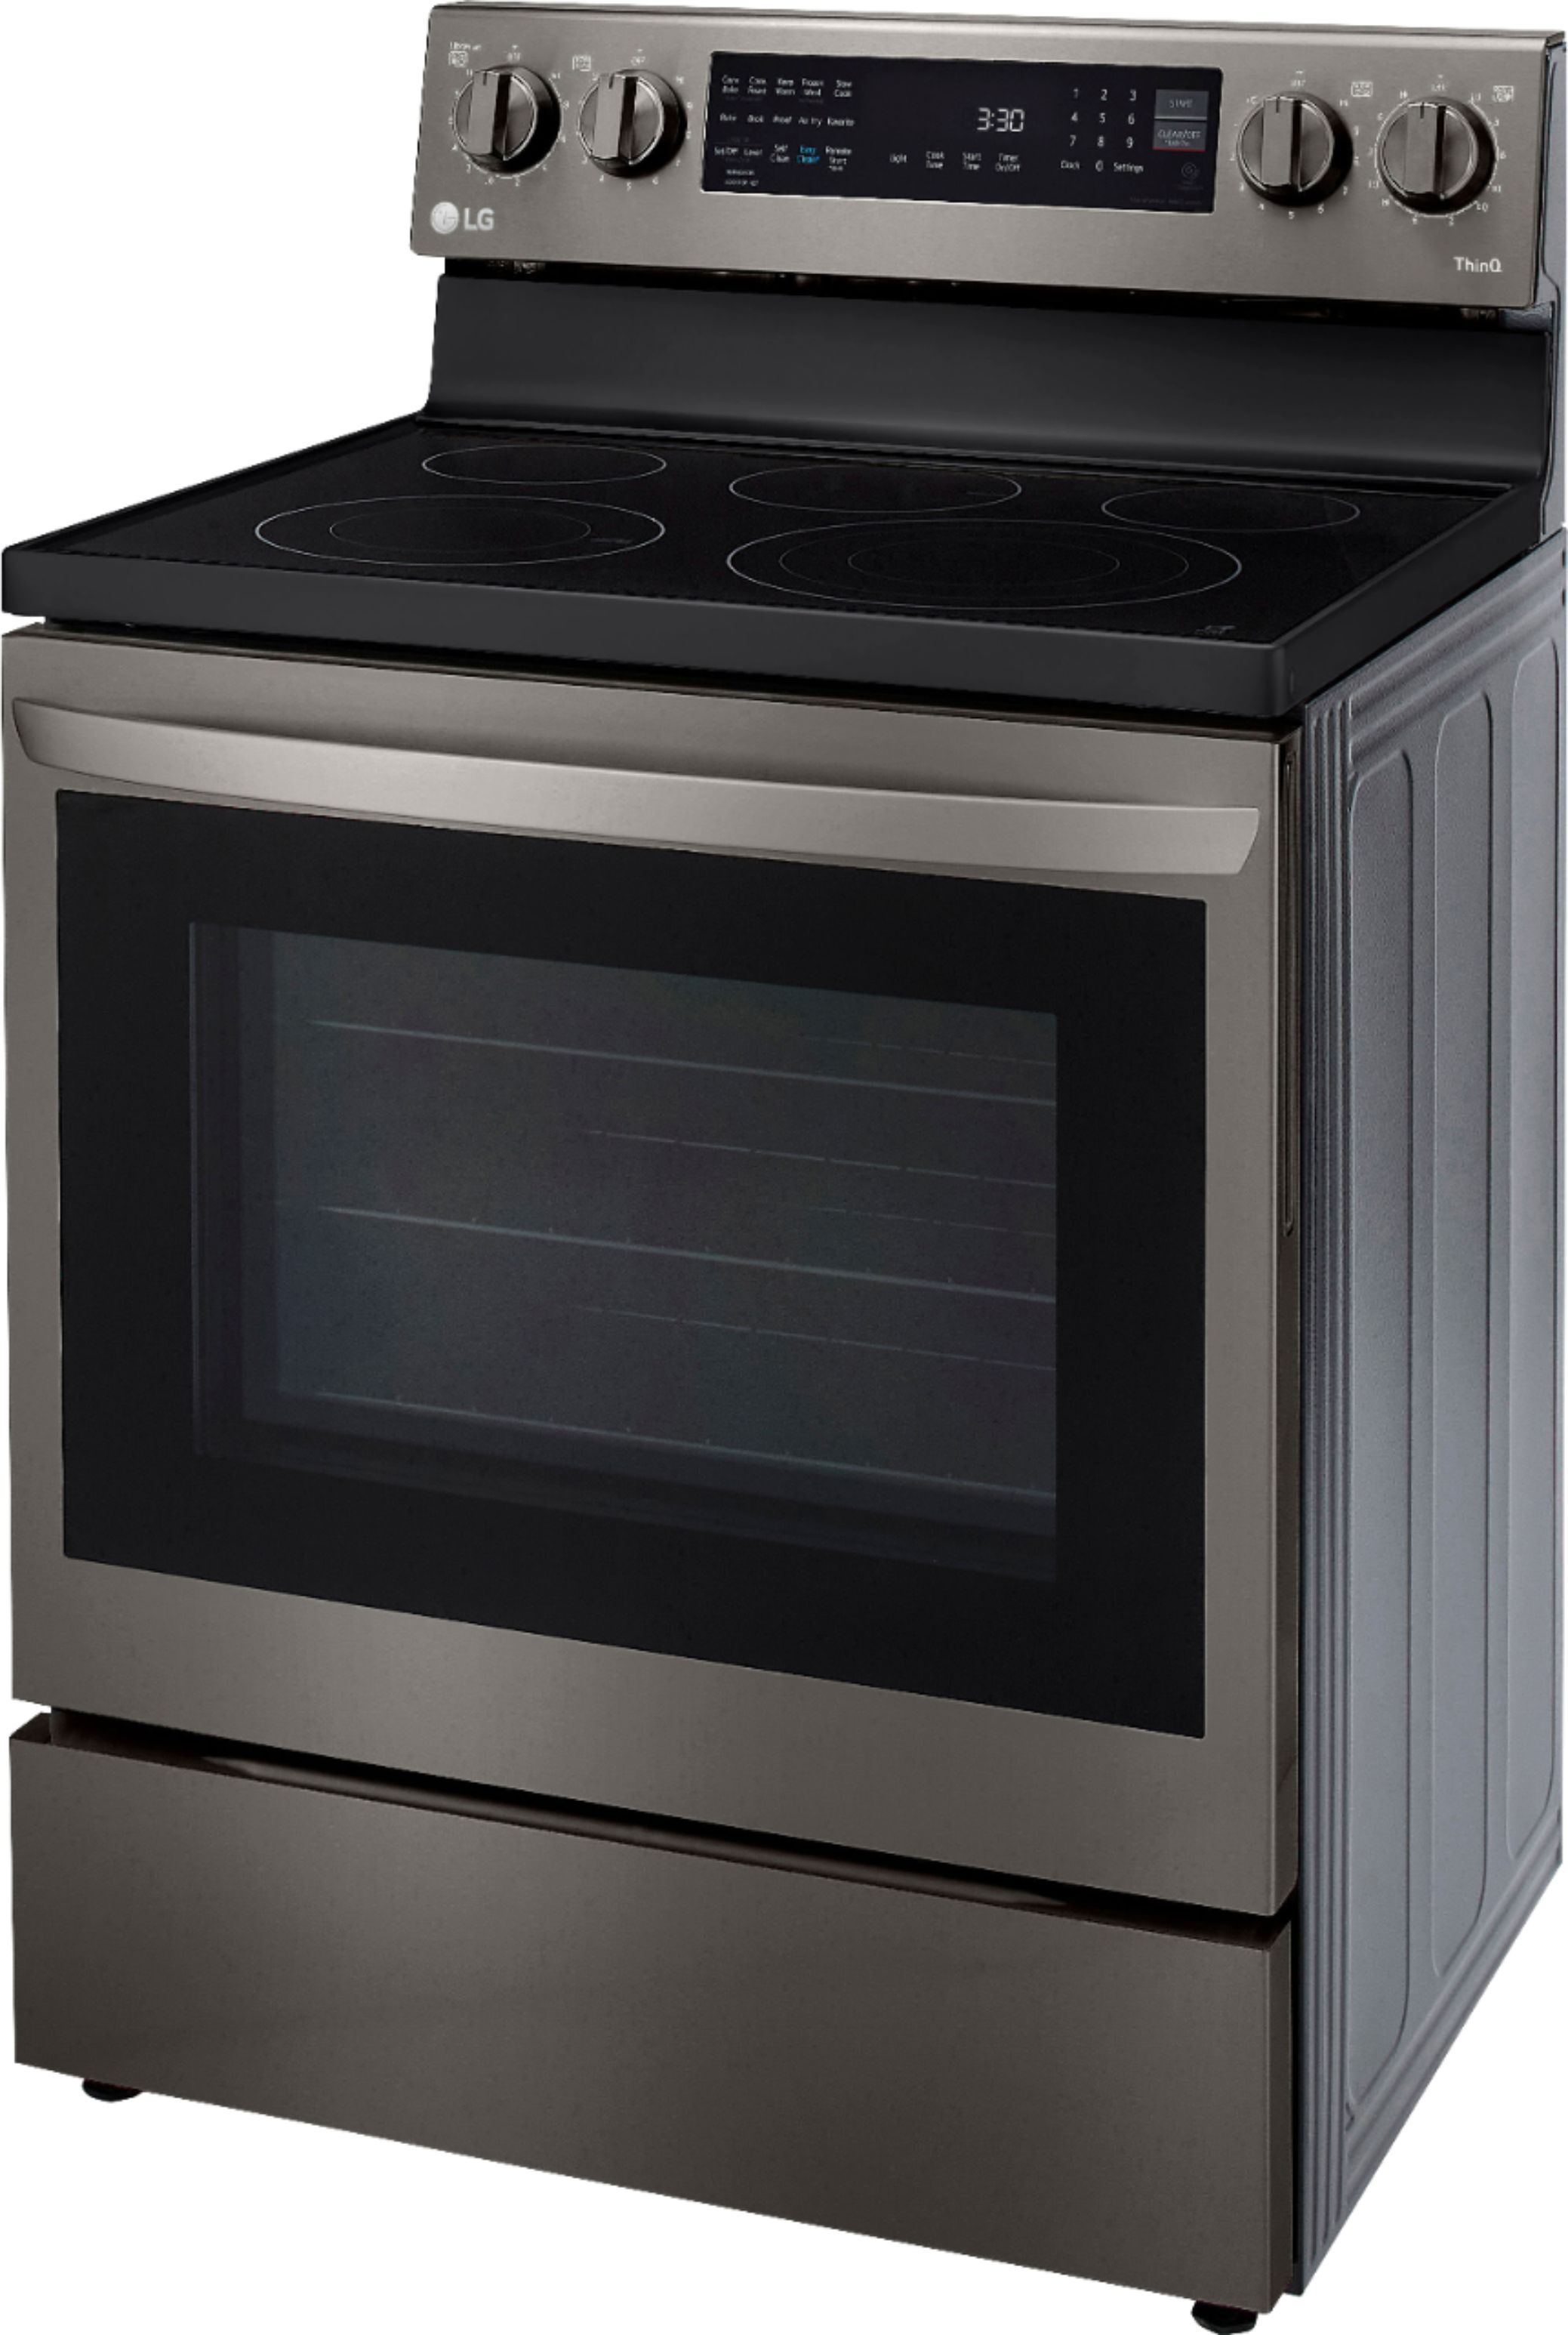 Angle View: LG - 6.3 Cu. Ft. Smart Freestanding Electric Convection Range with EasyClean, Air Fry and InstaView - Black stainless steel